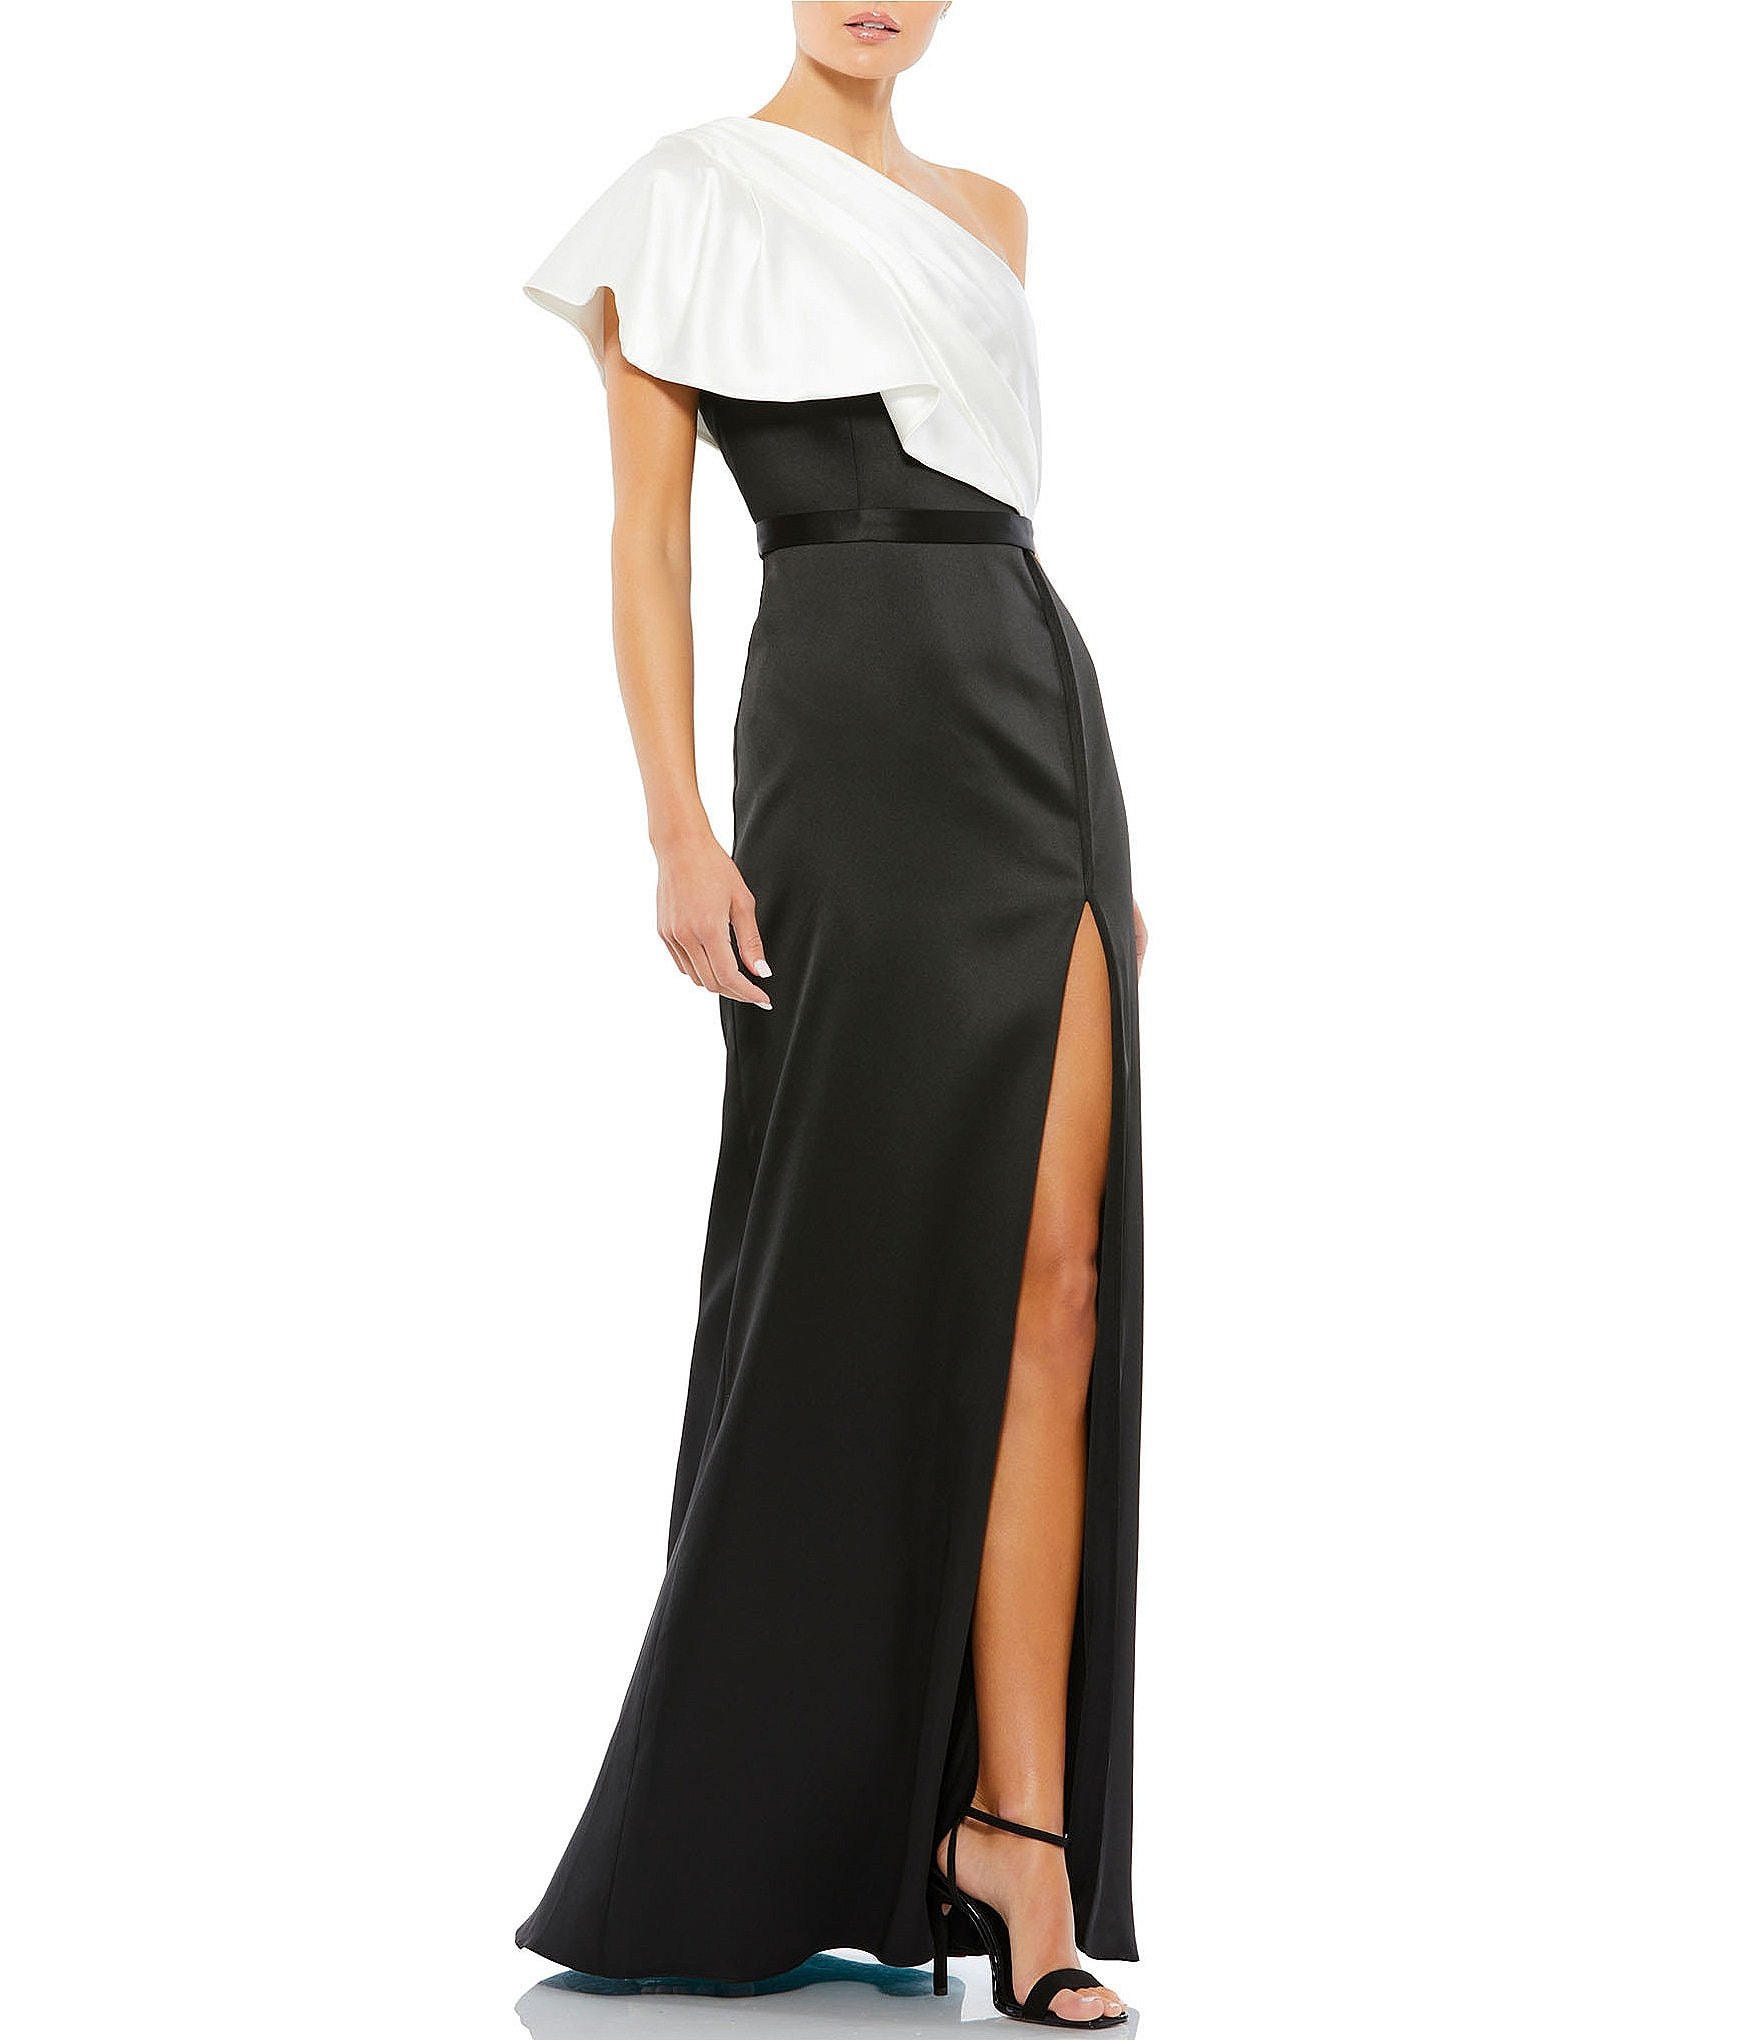 Black And White Formal Dress - June Bridals